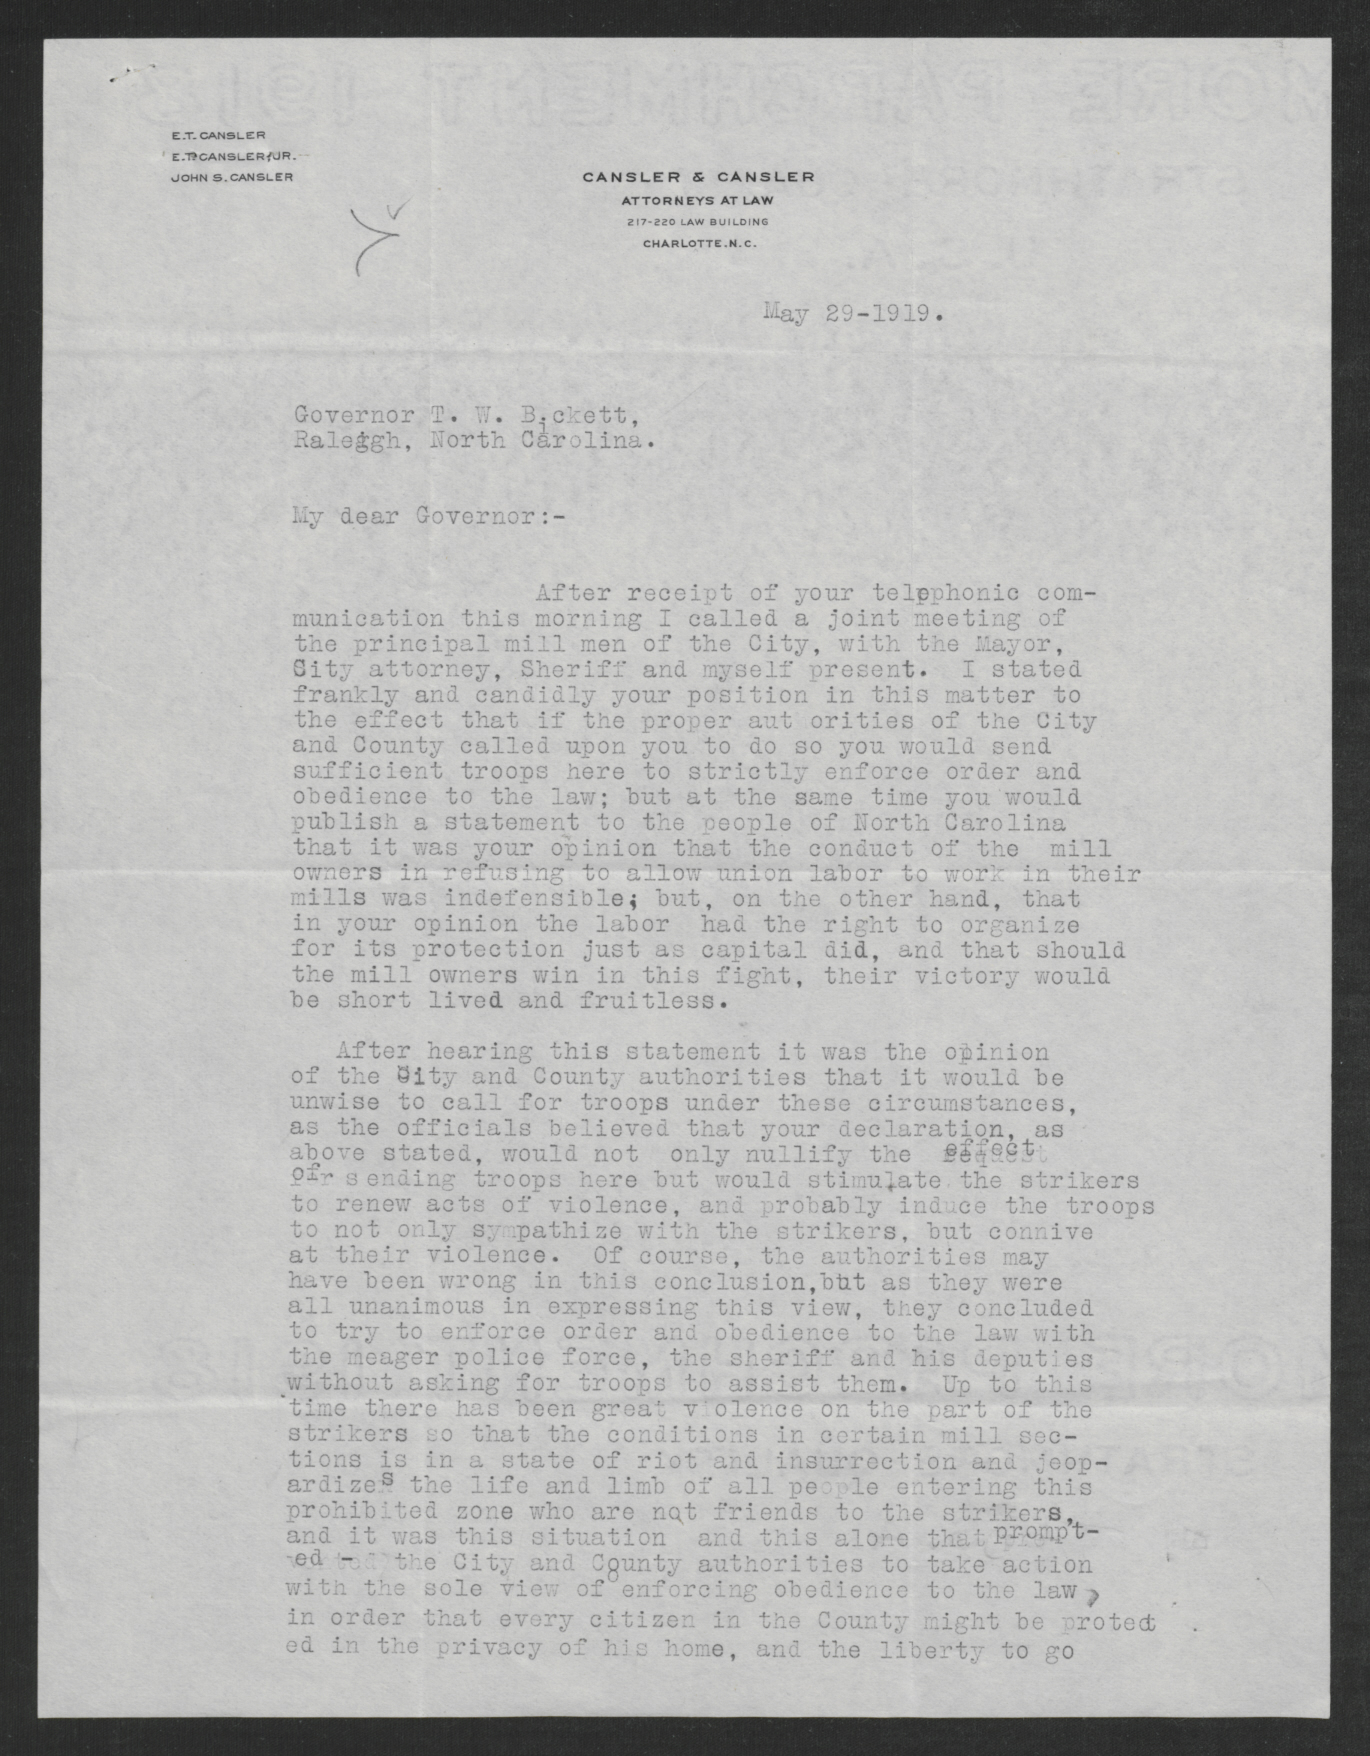 Letter from Edwin T. Cansler to Thomas W. Bickett, May 29 1919, page 1